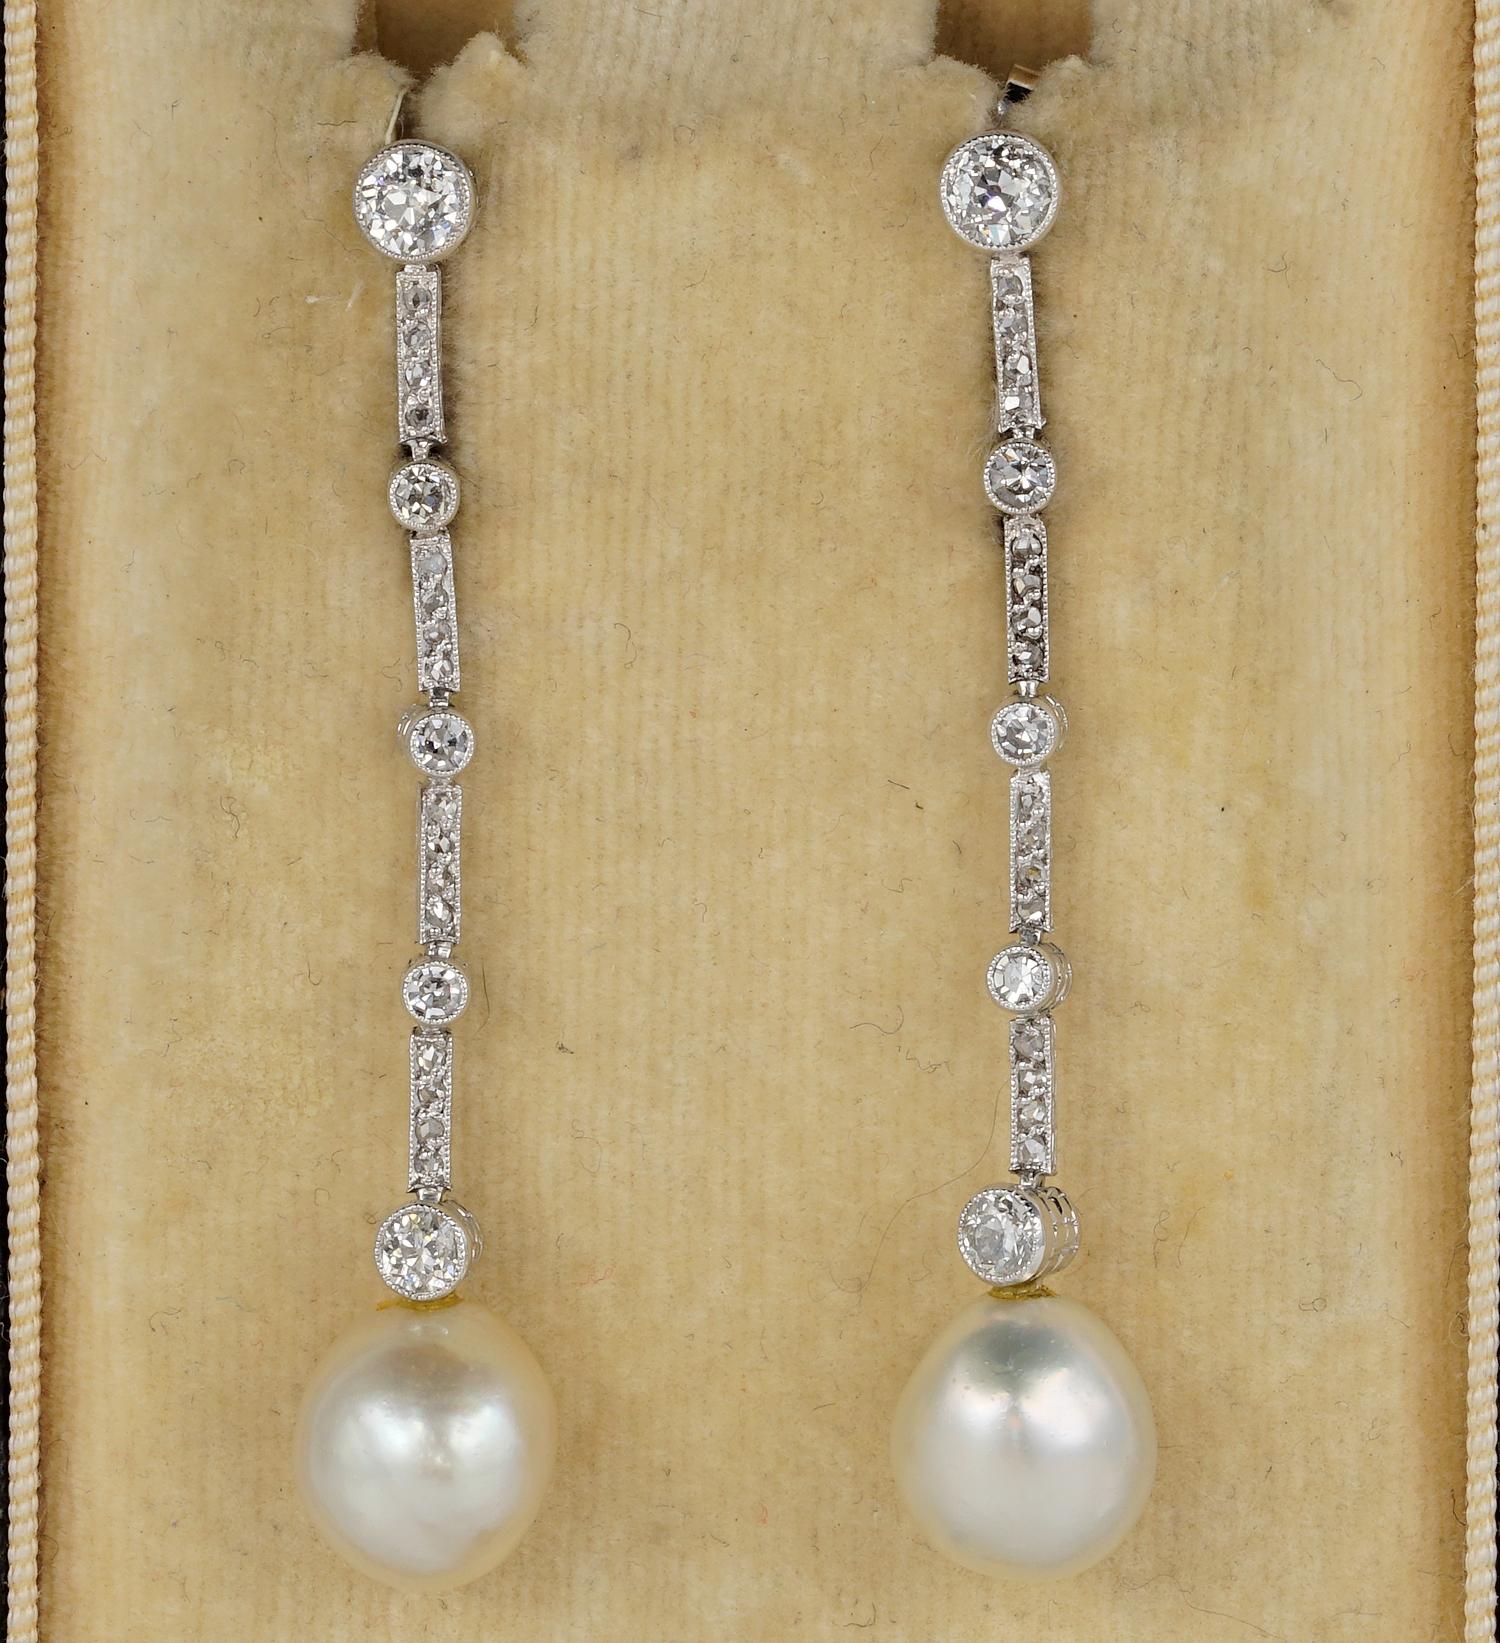 This outstanding pair of earrings is Edwardian period, 1905 ca
Hand crafted of solid Platinum
Long sleek design expressed in a long line of Diamonds and suspended Pearls
Set with 1.20 Ct of Diamonds between old mine cut and rose cut – rated G